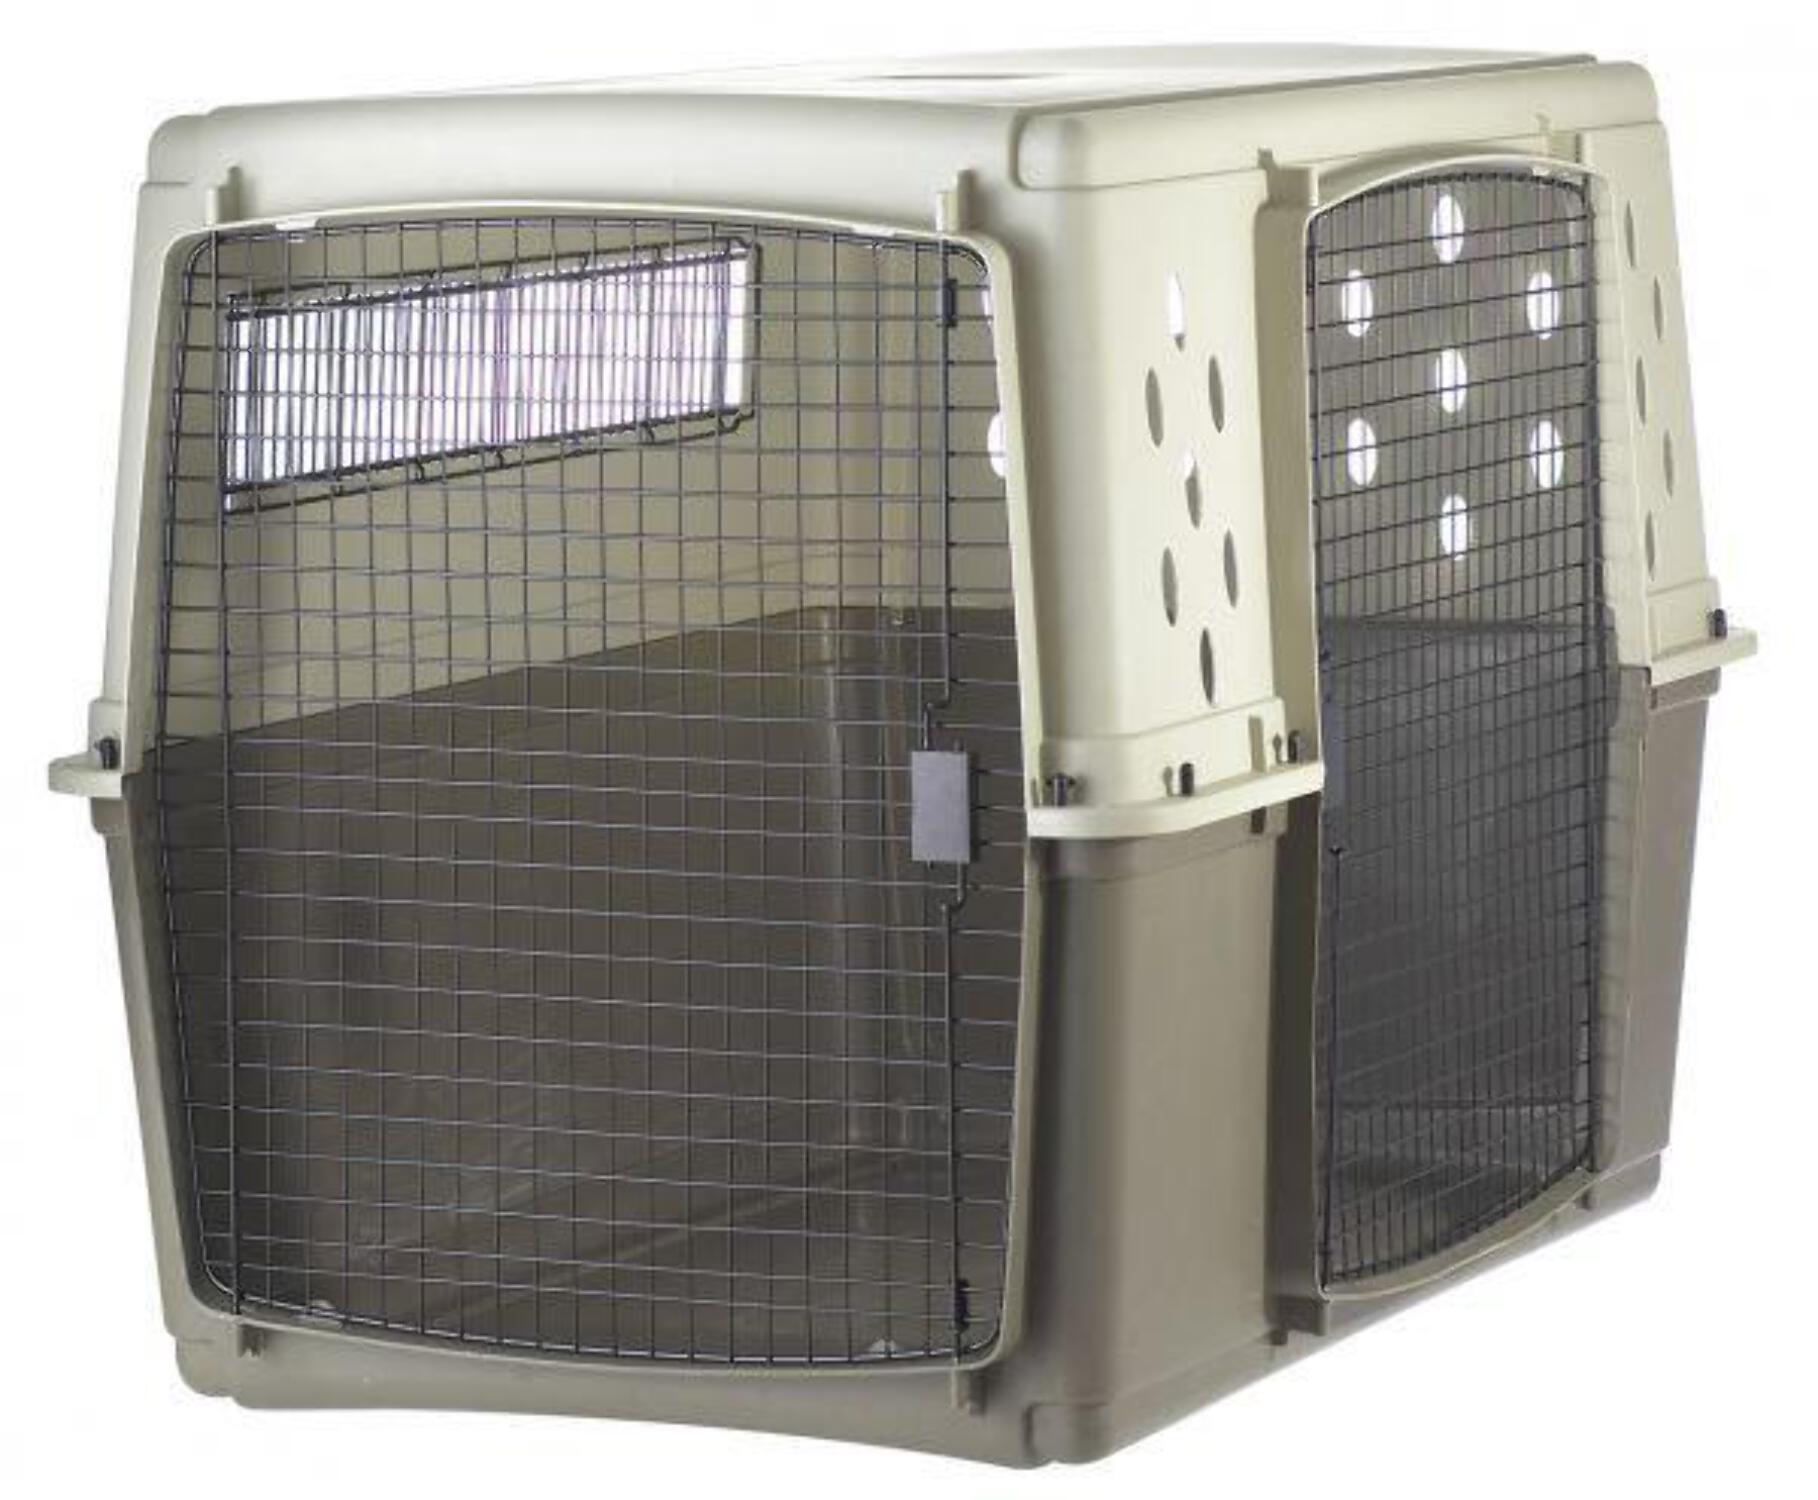 Miller Manufacturing 405073222 - 30 x 27 x 41 in. Extra Large Plastic Pet Crate